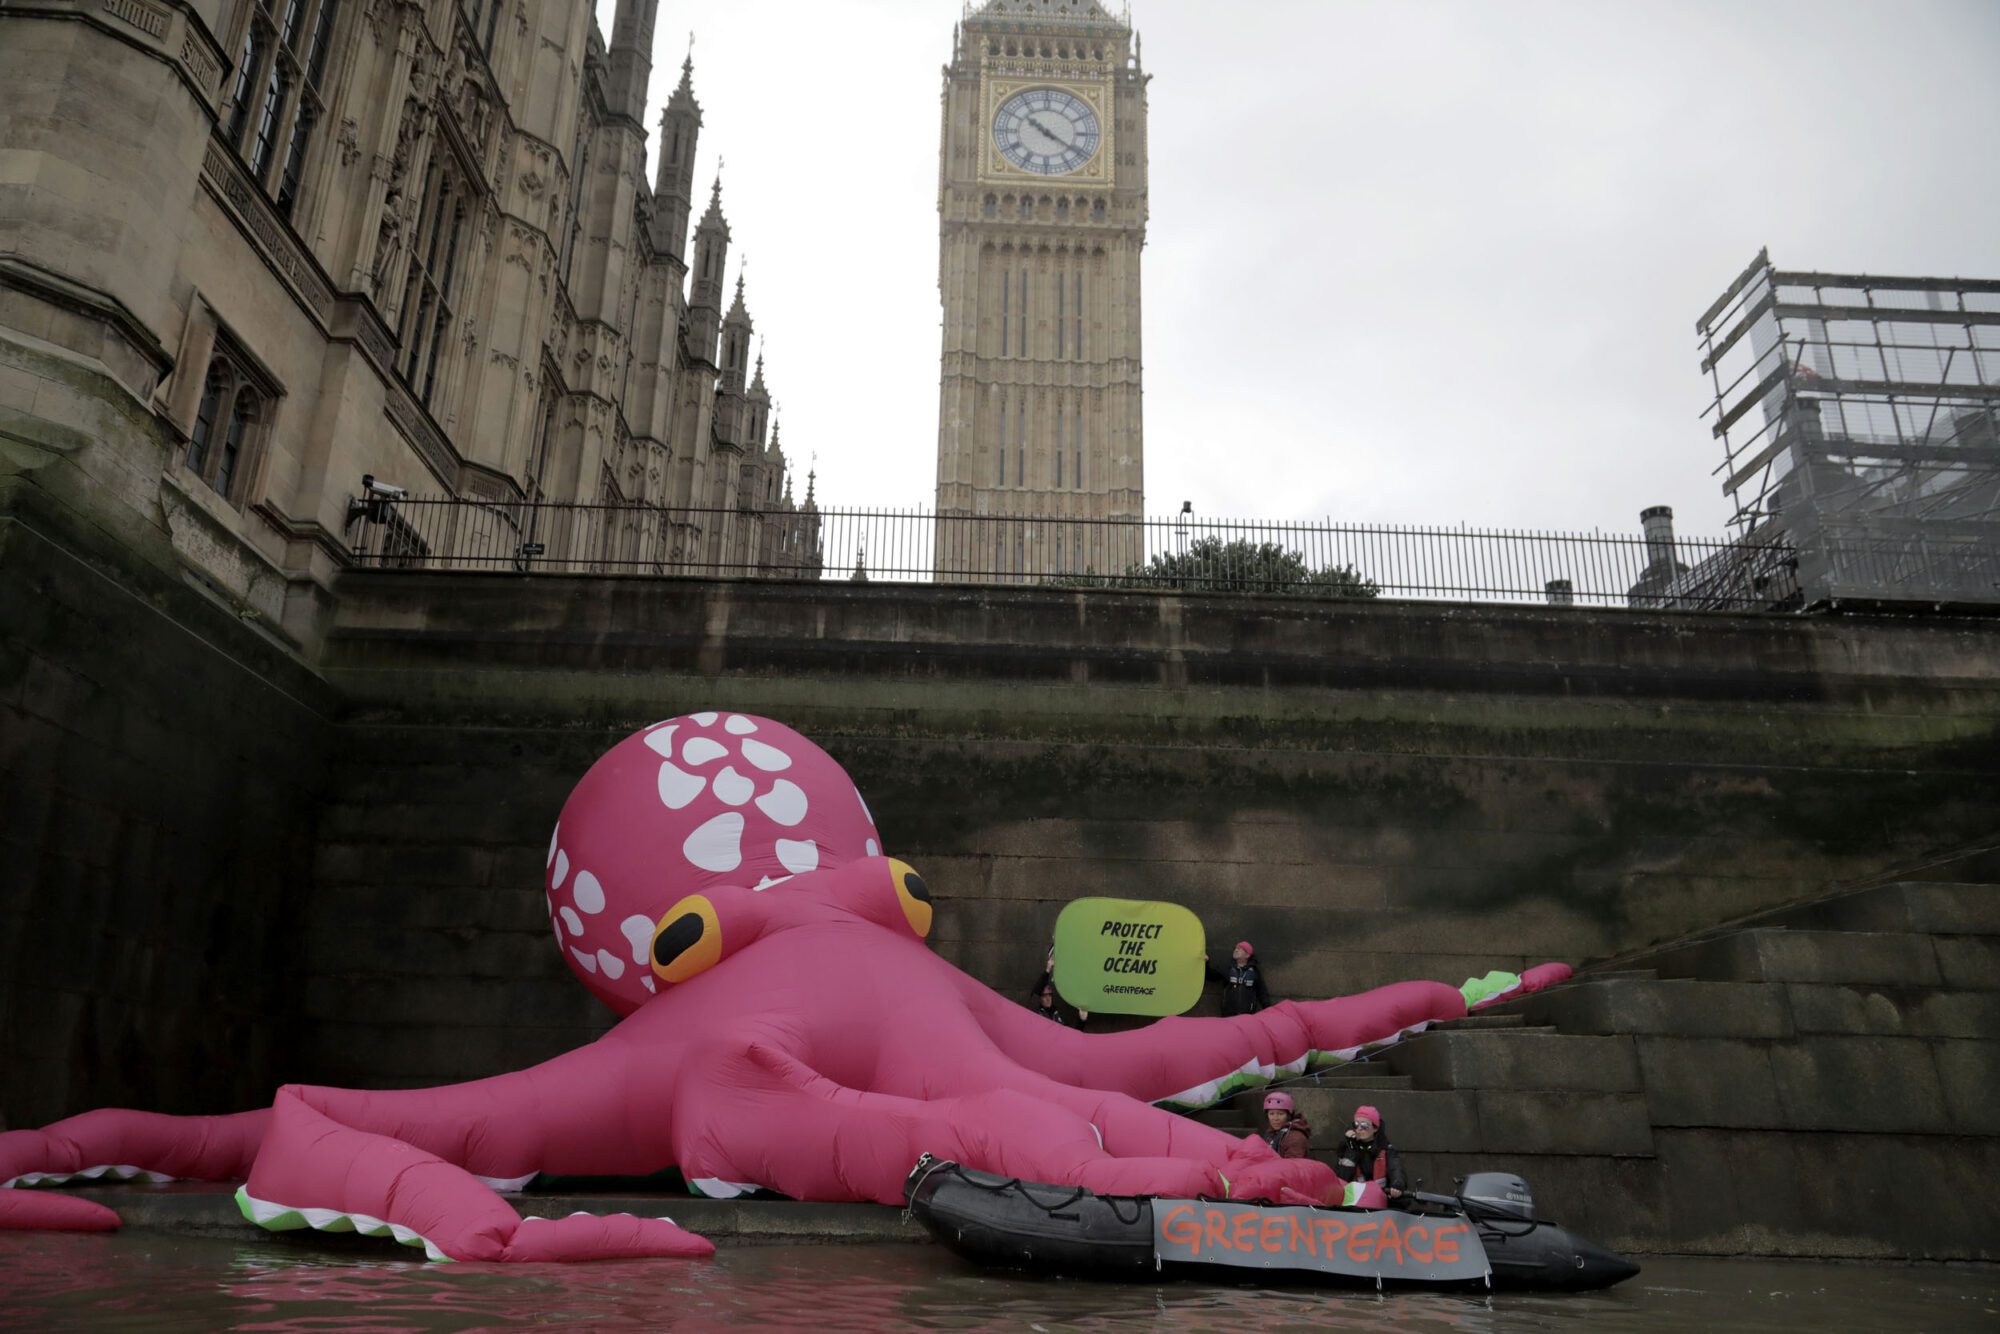 A bright pink inflated octopus shape with bulging eyes and white detailing on the head and tentacles sits on some steps down to a river with Big Ben visible in the background. The octoput is half laid across a rhib boat with a grey banner reading Greenpeace in orange. Behind is a yellow banner reading "Protect the oceans"